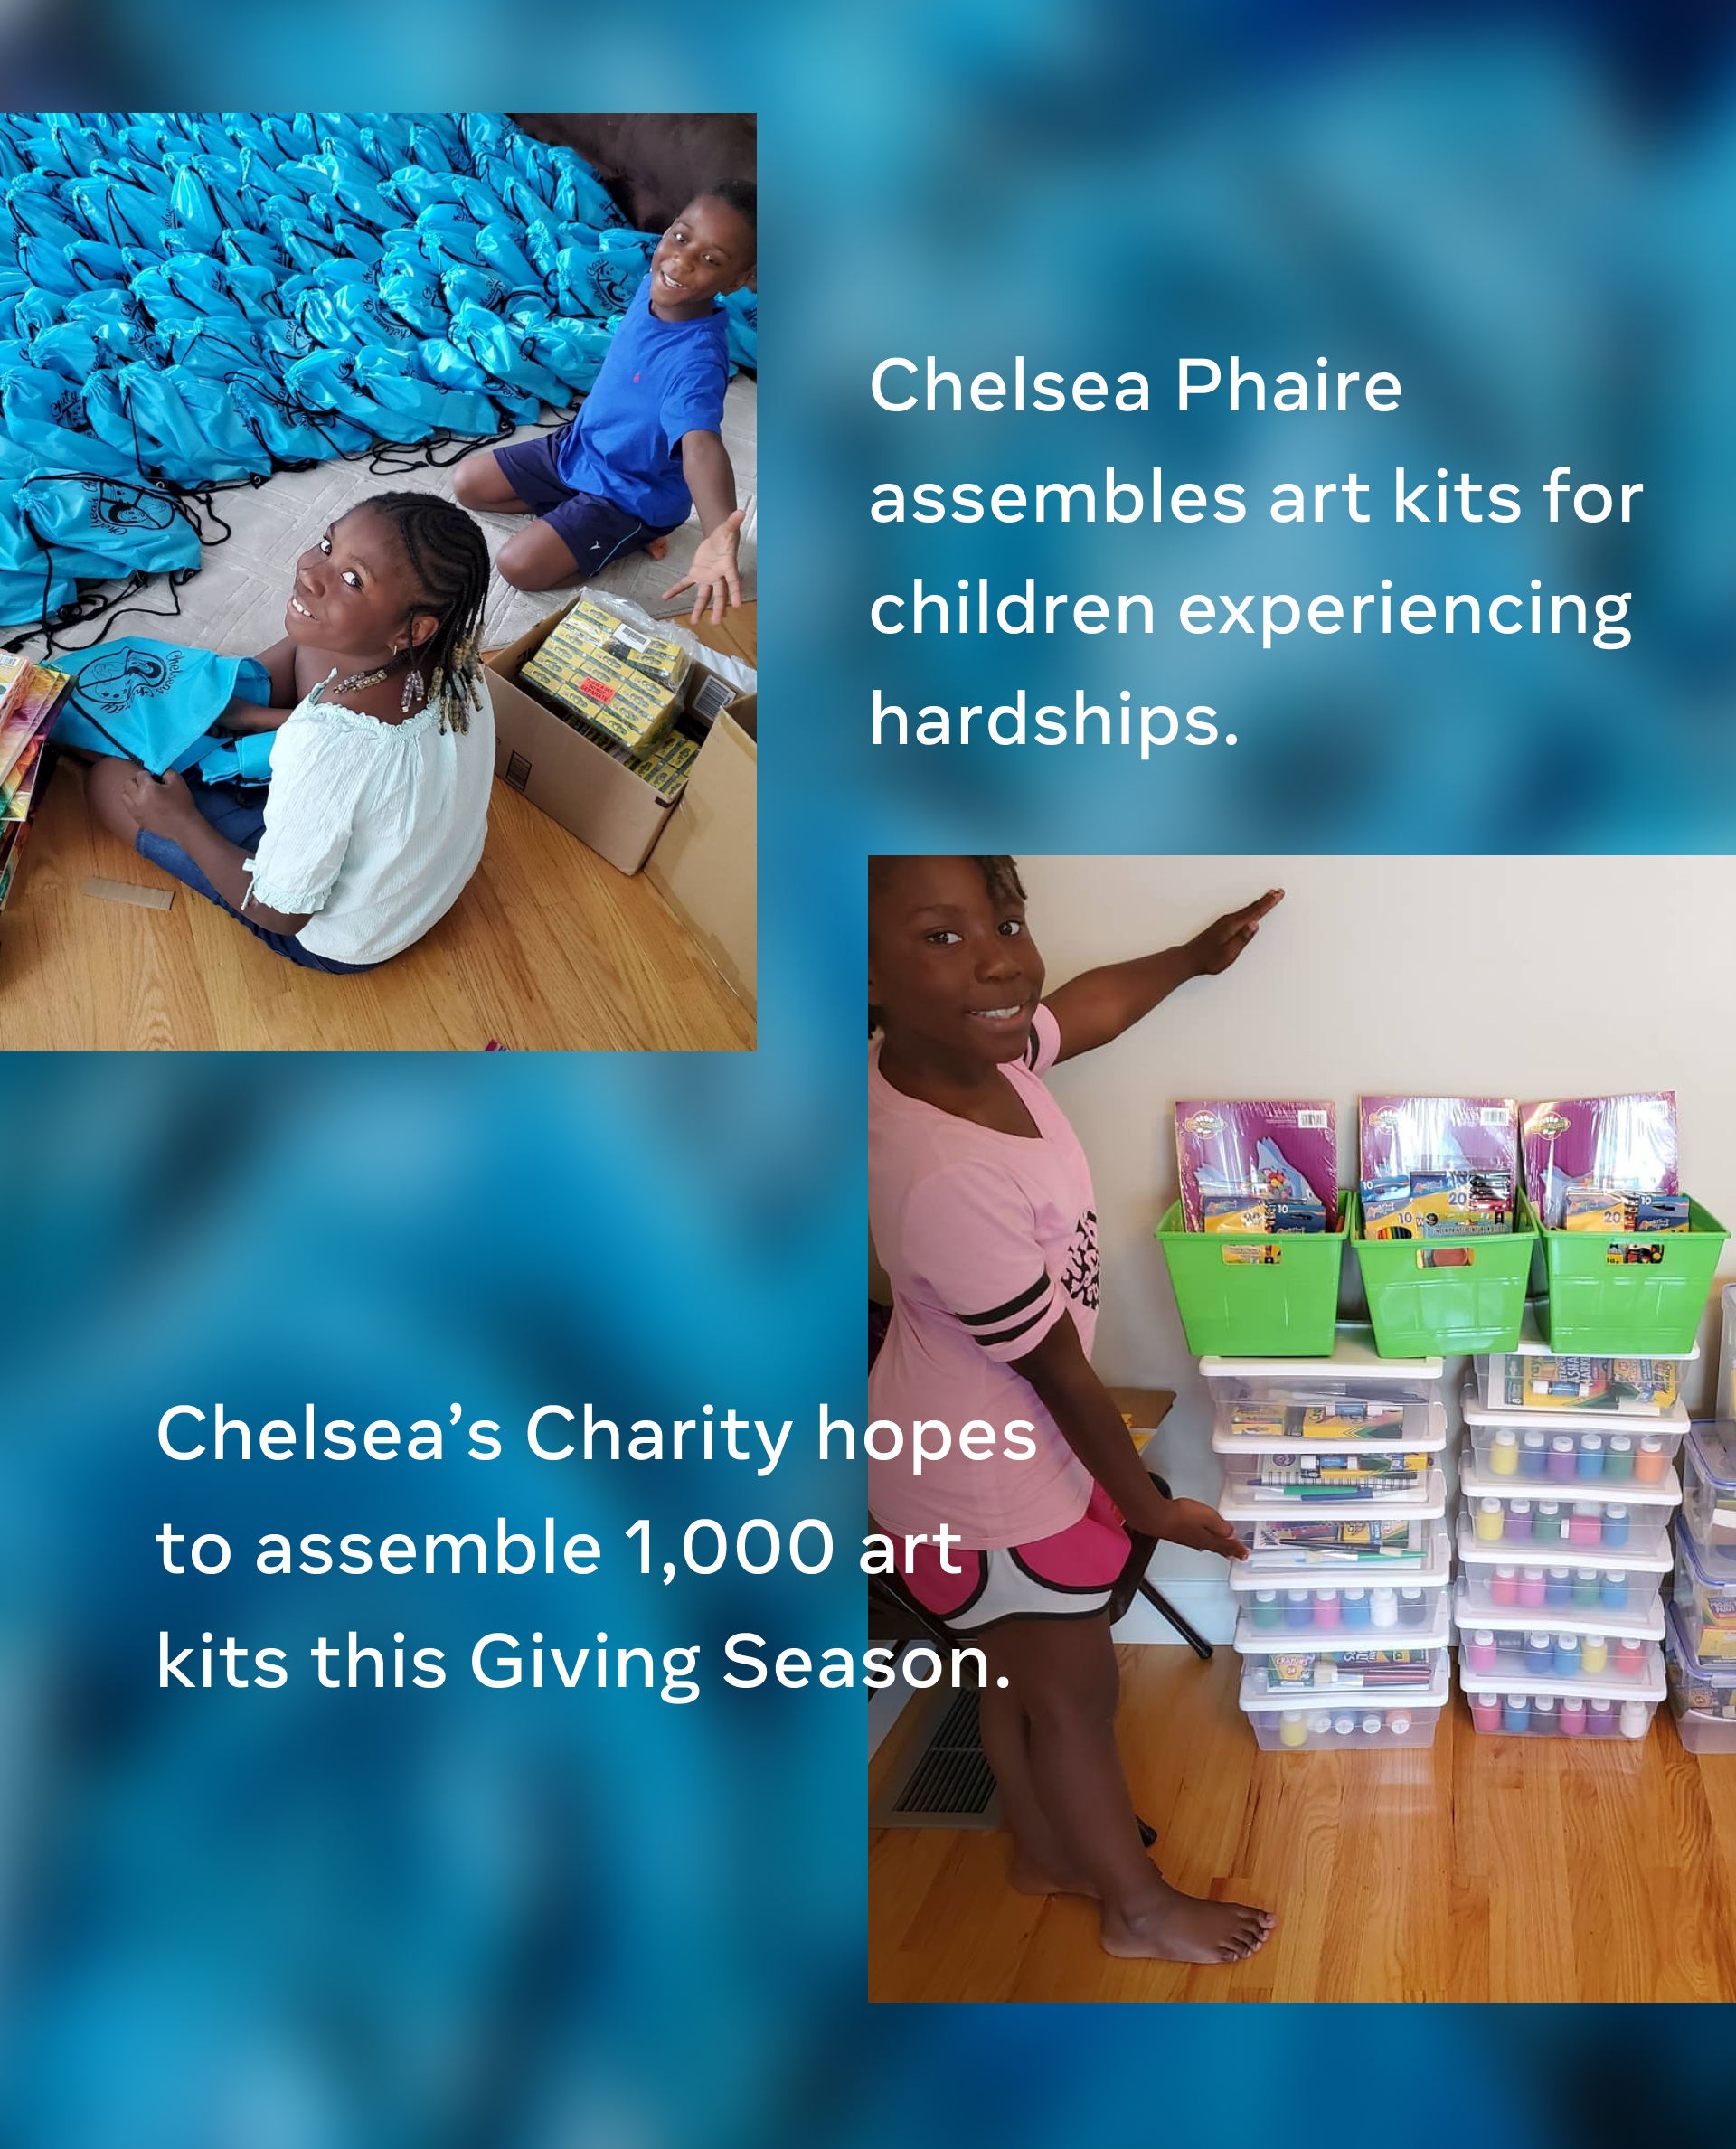 Infographic on Chelsea's Charity